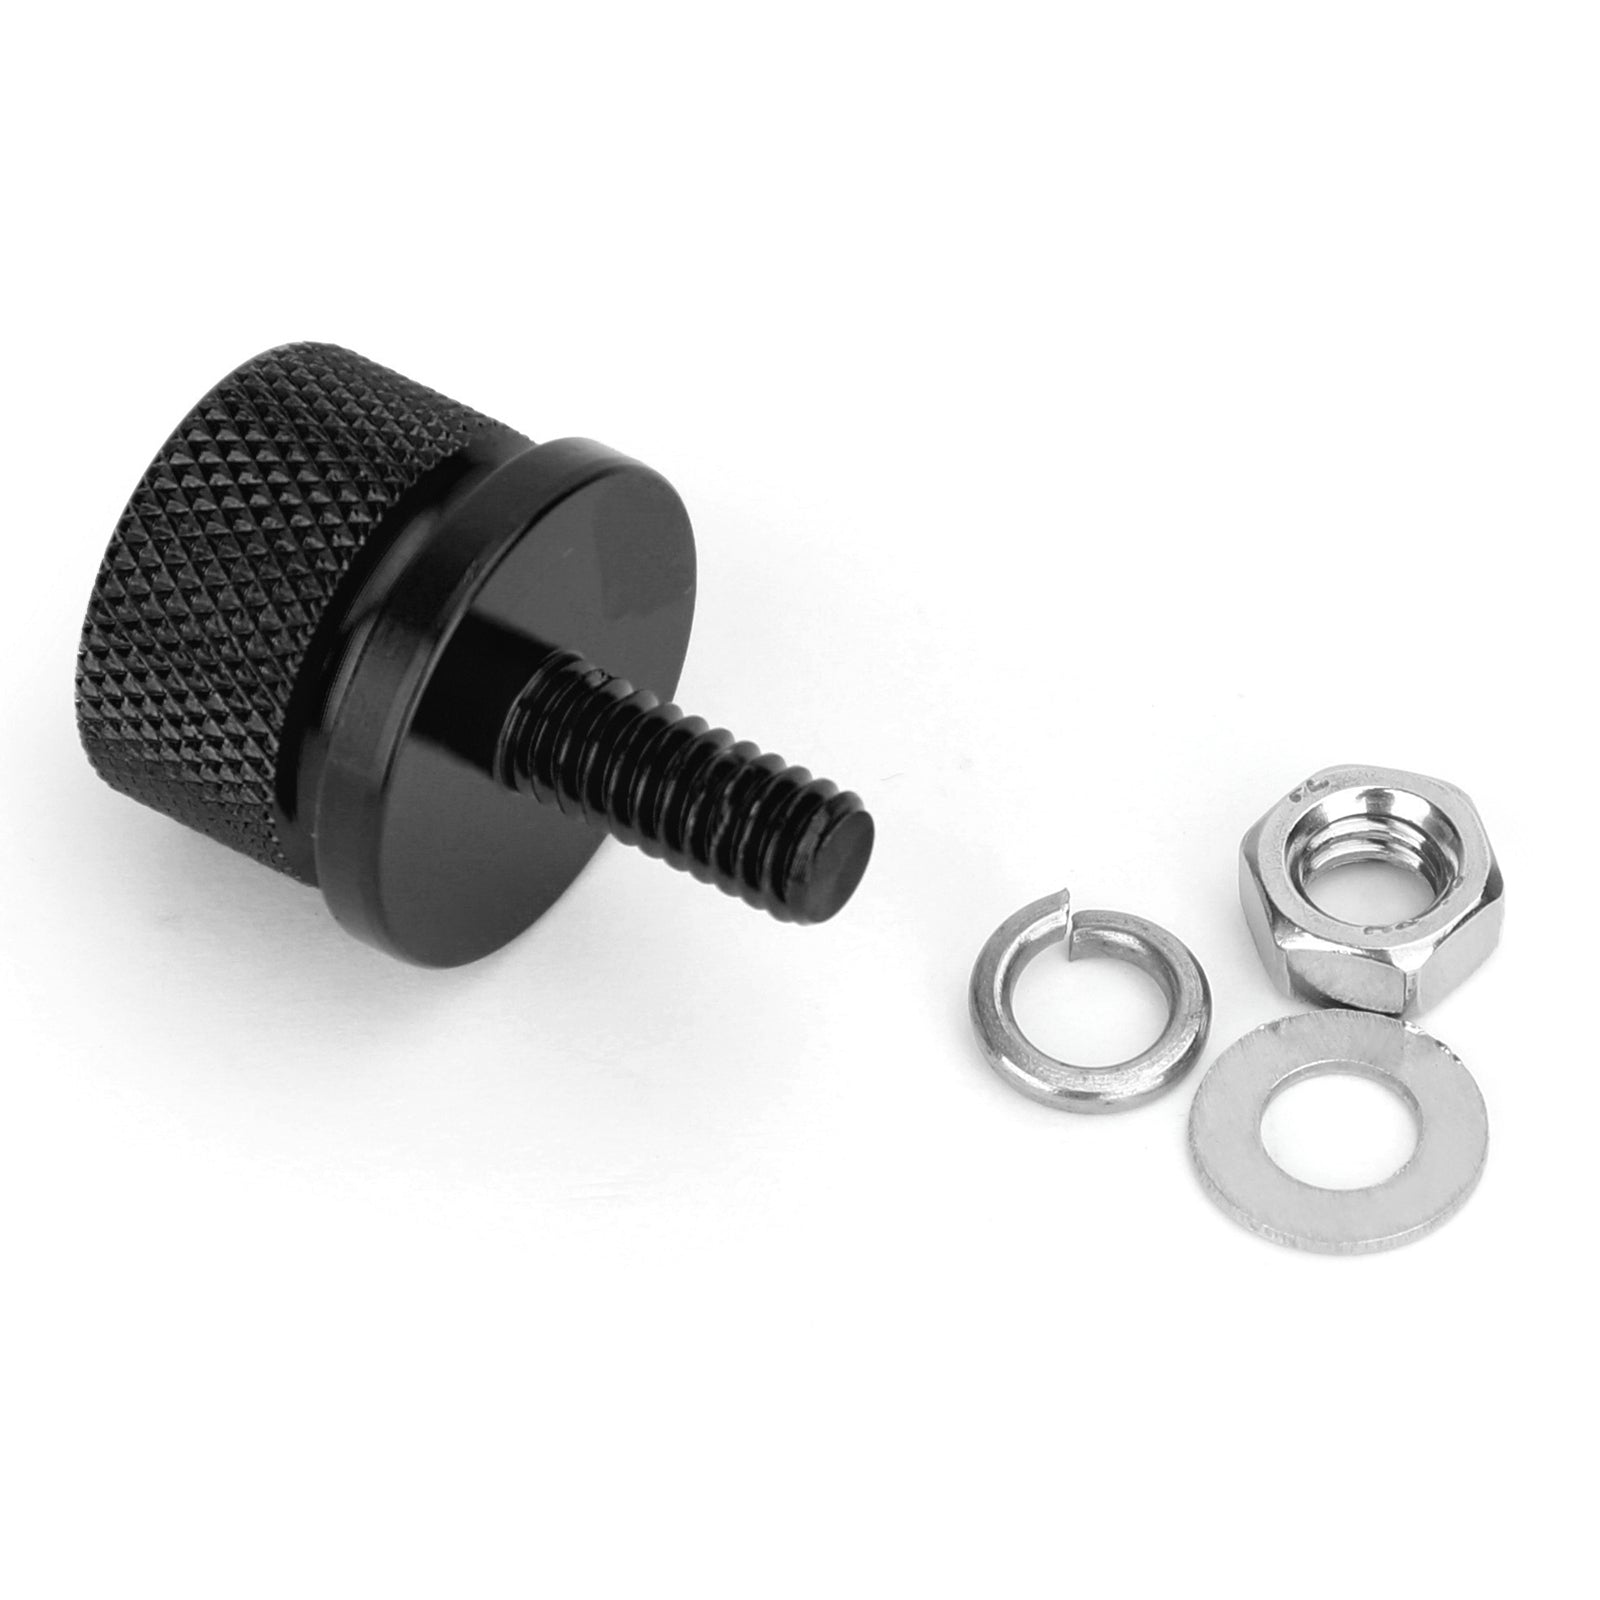 Billet Aluminum Knurled Seat Bolt fit for Harley Softail Dyna Sportster Touring